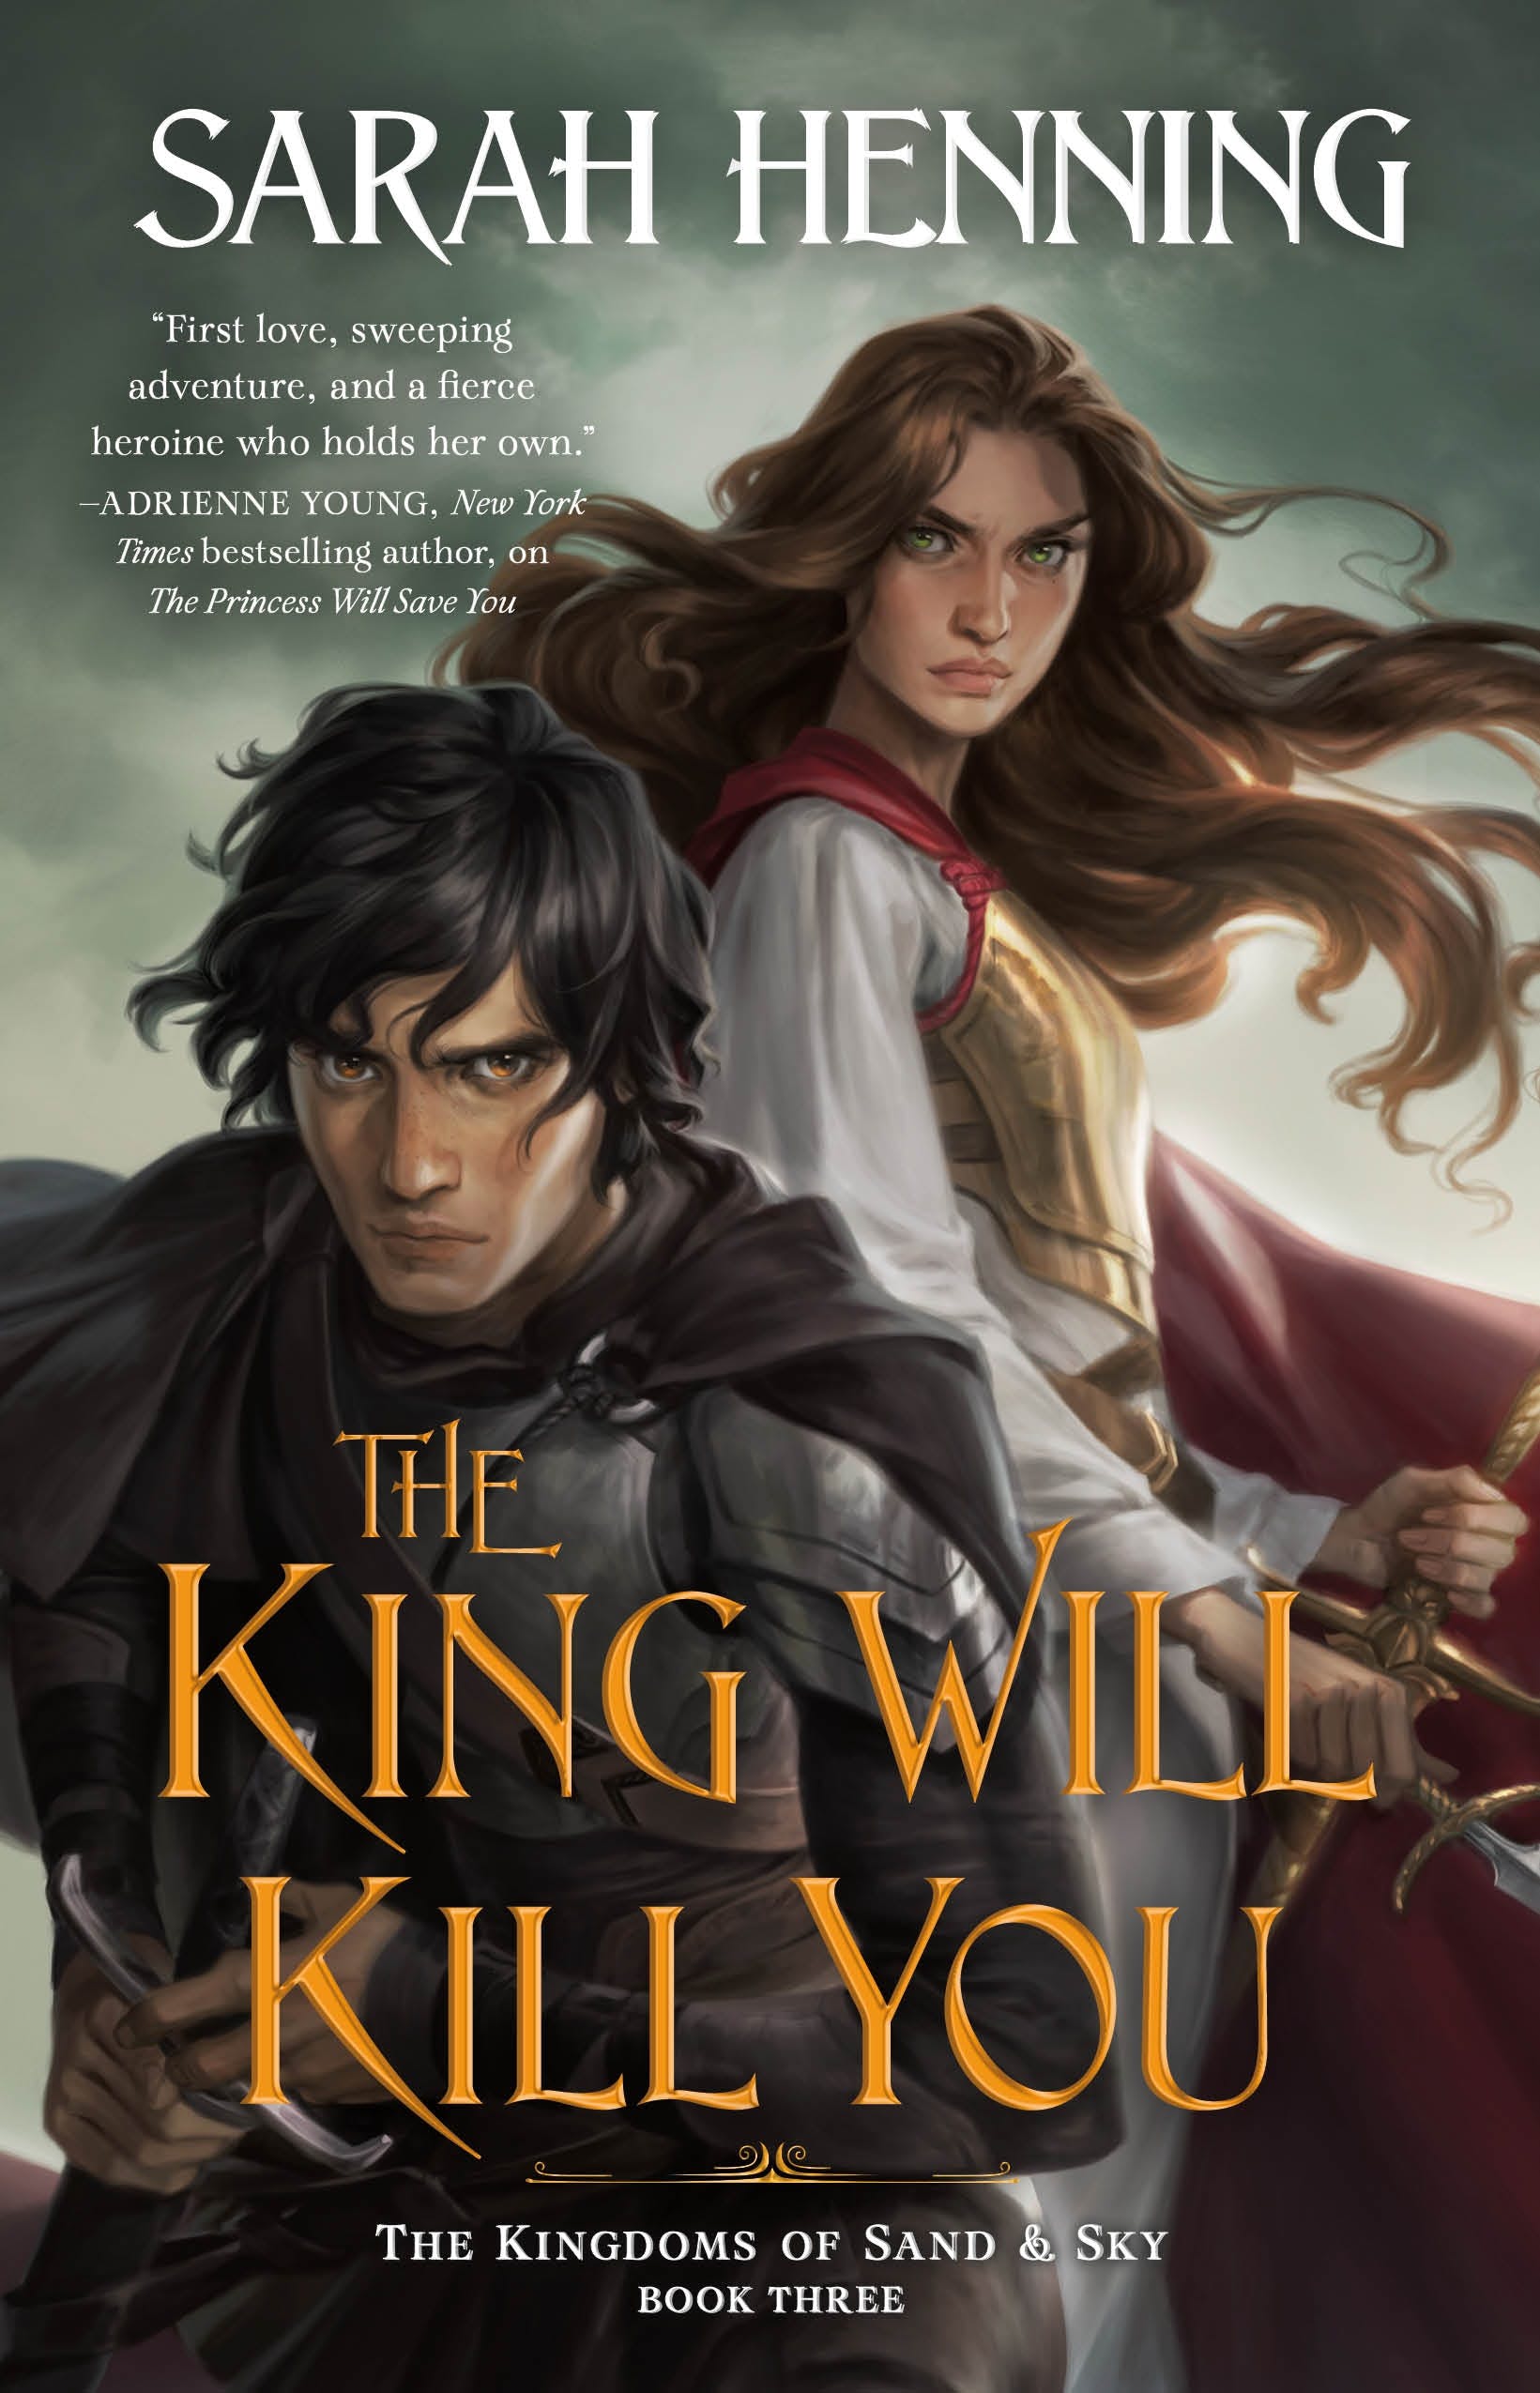 Cover for Sarah Henning's 'The King Will Kill You'